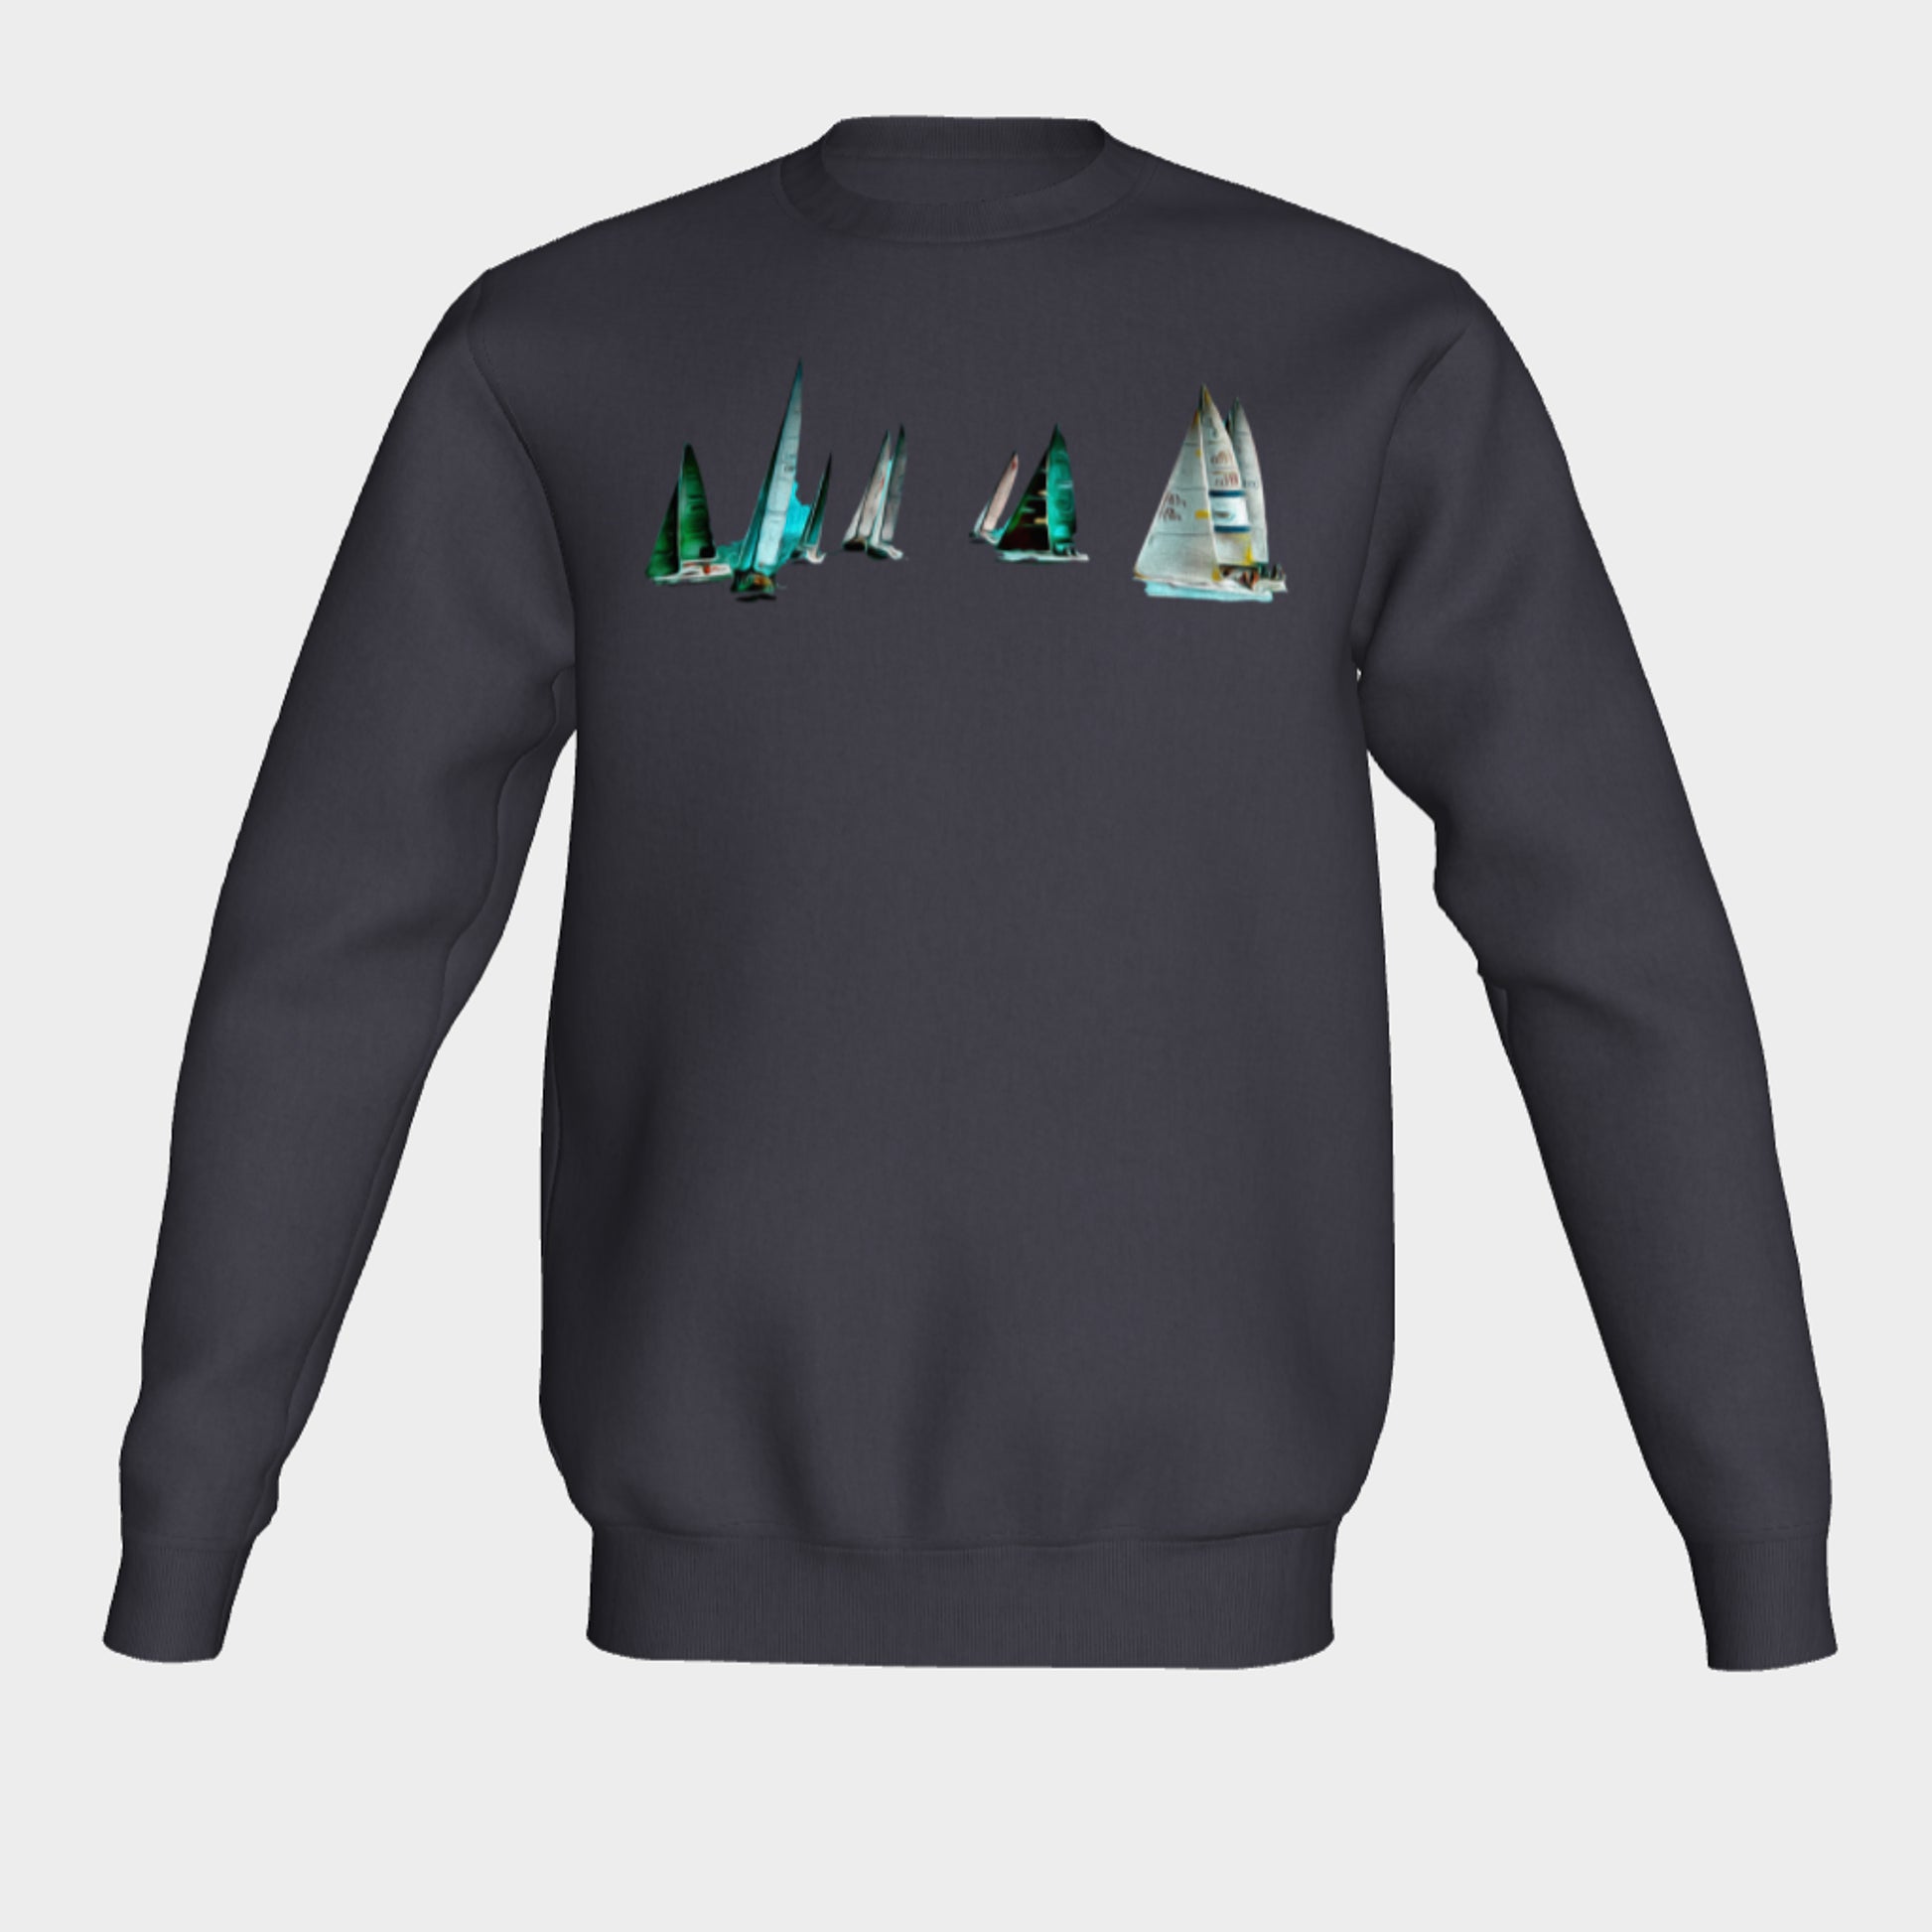 Sail Away Crewneck Sweatshirt What’s better than a super cozy sweatshirt? A super cozy sweatshirt from Van Isle Goddess!  Super cozy unisex sweatshirt for those chilly days.  Excellent for men or women.   Fit is roomy and comfortable. 